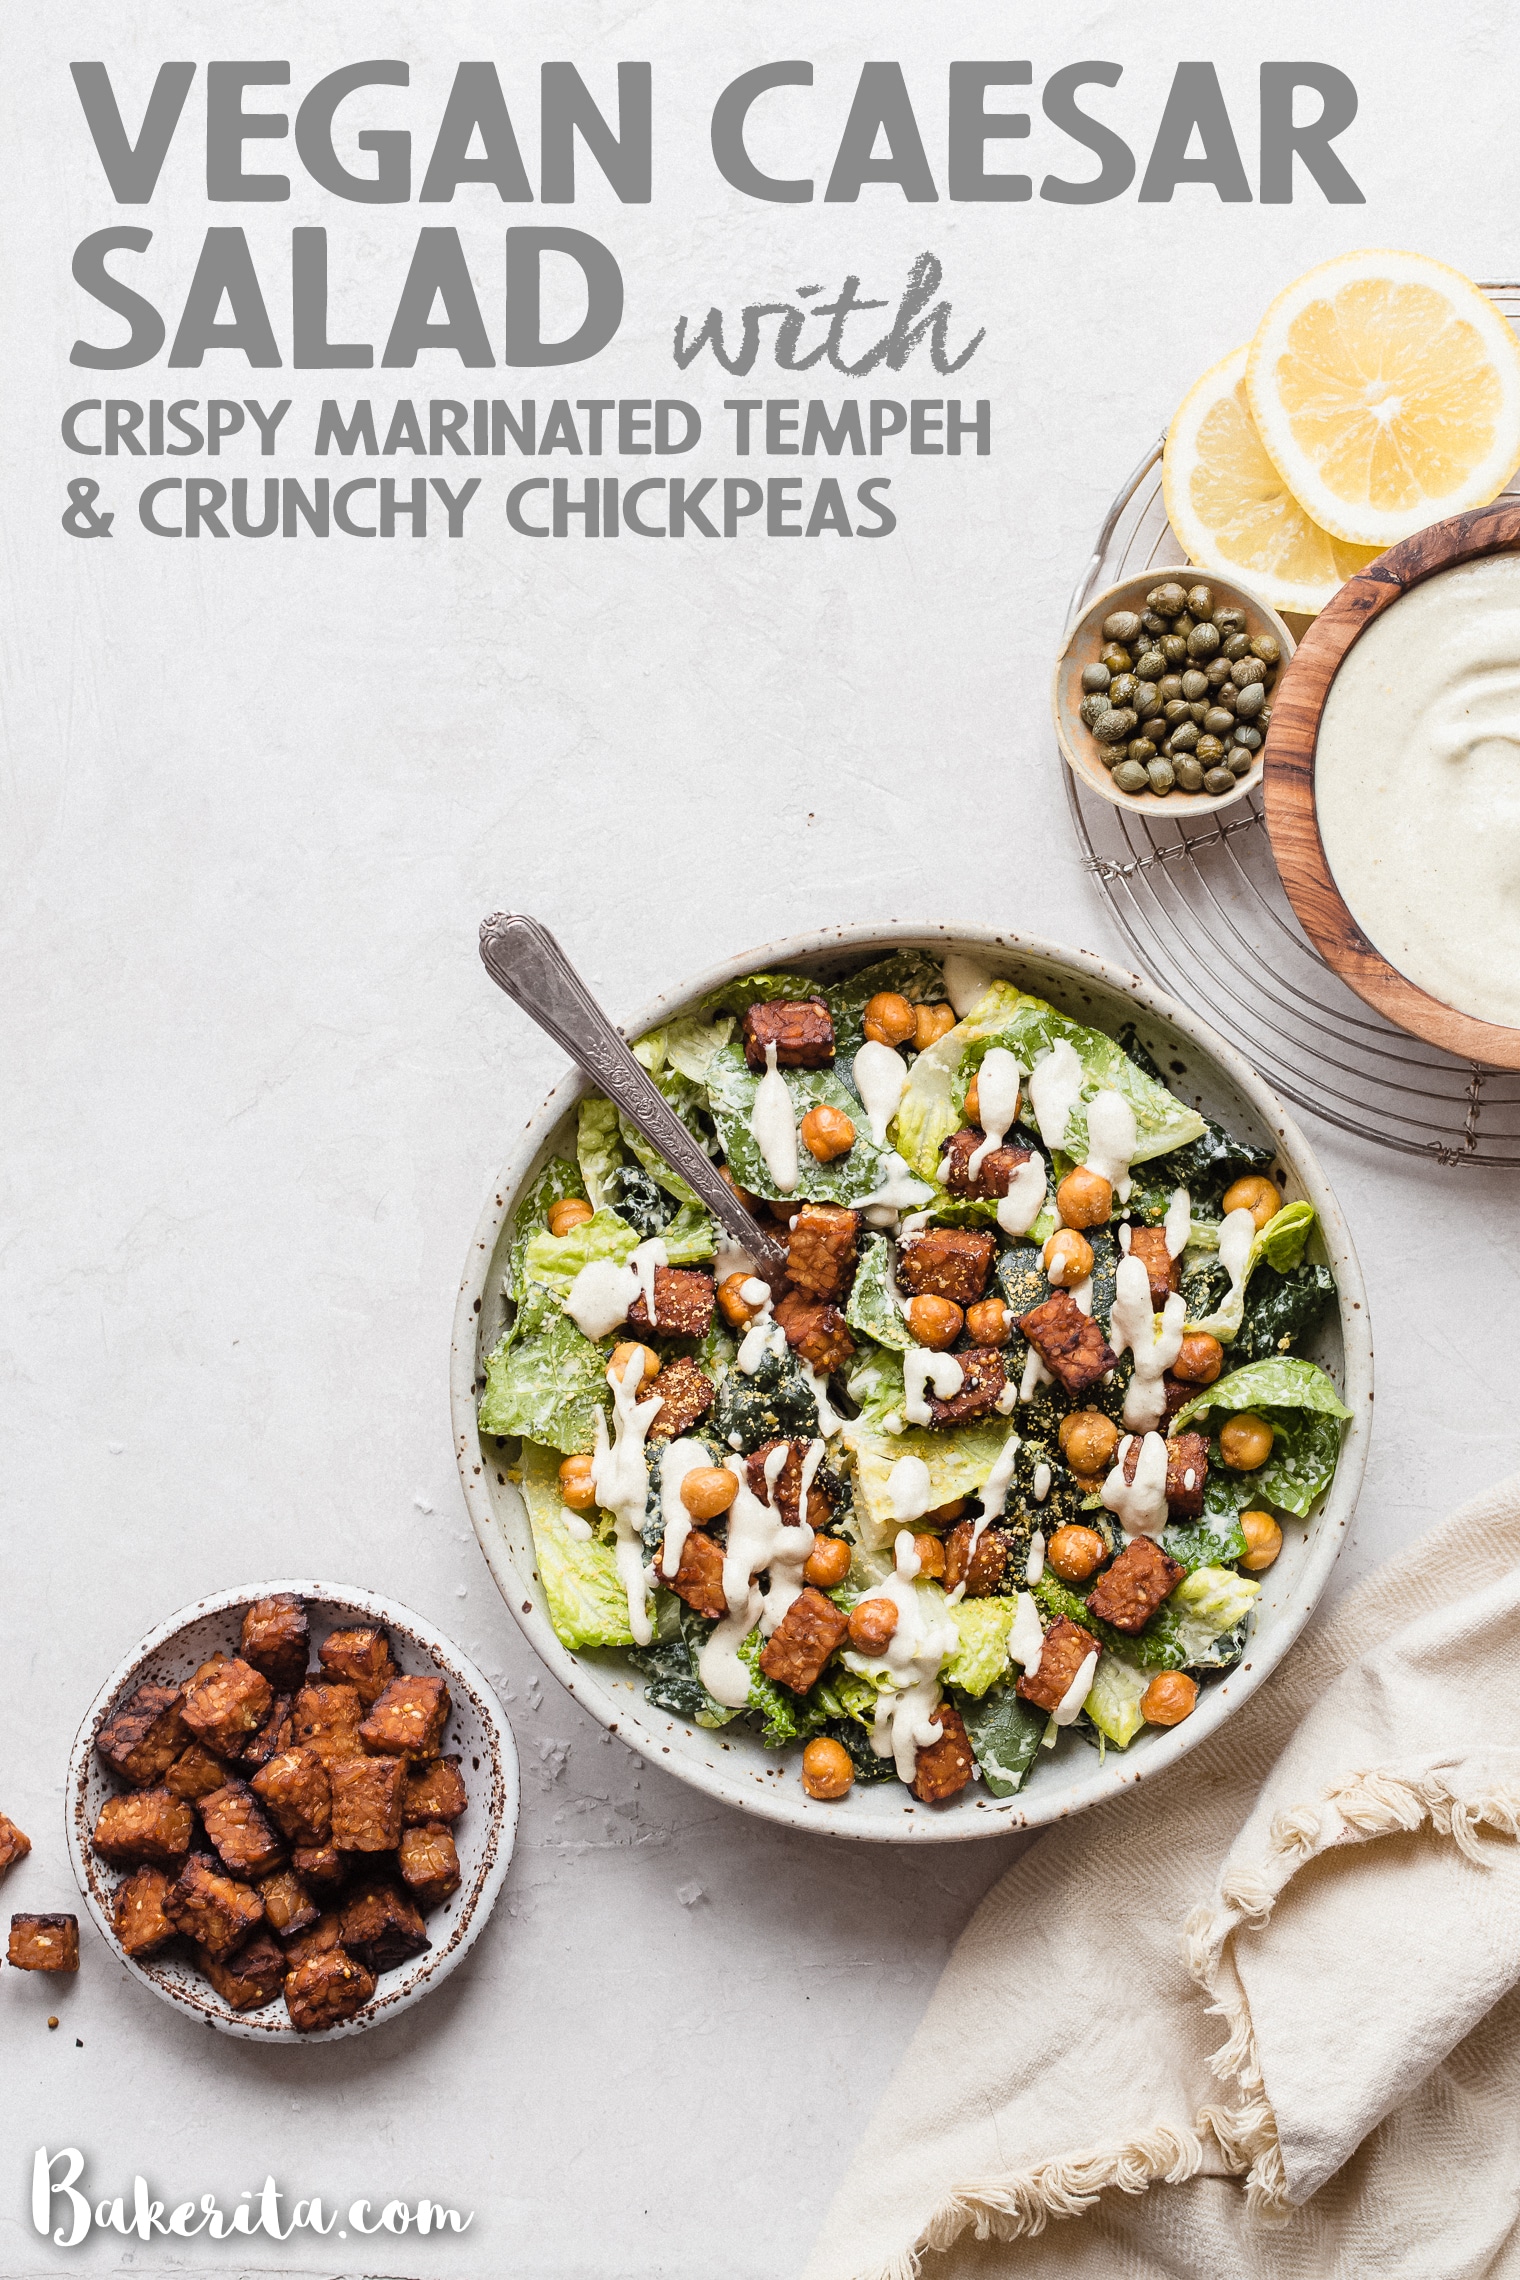 Serve this Vegan Caesar Salad with Crispy Tempeh & Crunchy Chickpeas for lunch or dinner - it's delicious anytime! The crispy marined tempeh is incredibly flavorful and filling and the chickpeas add lots of crunch. 